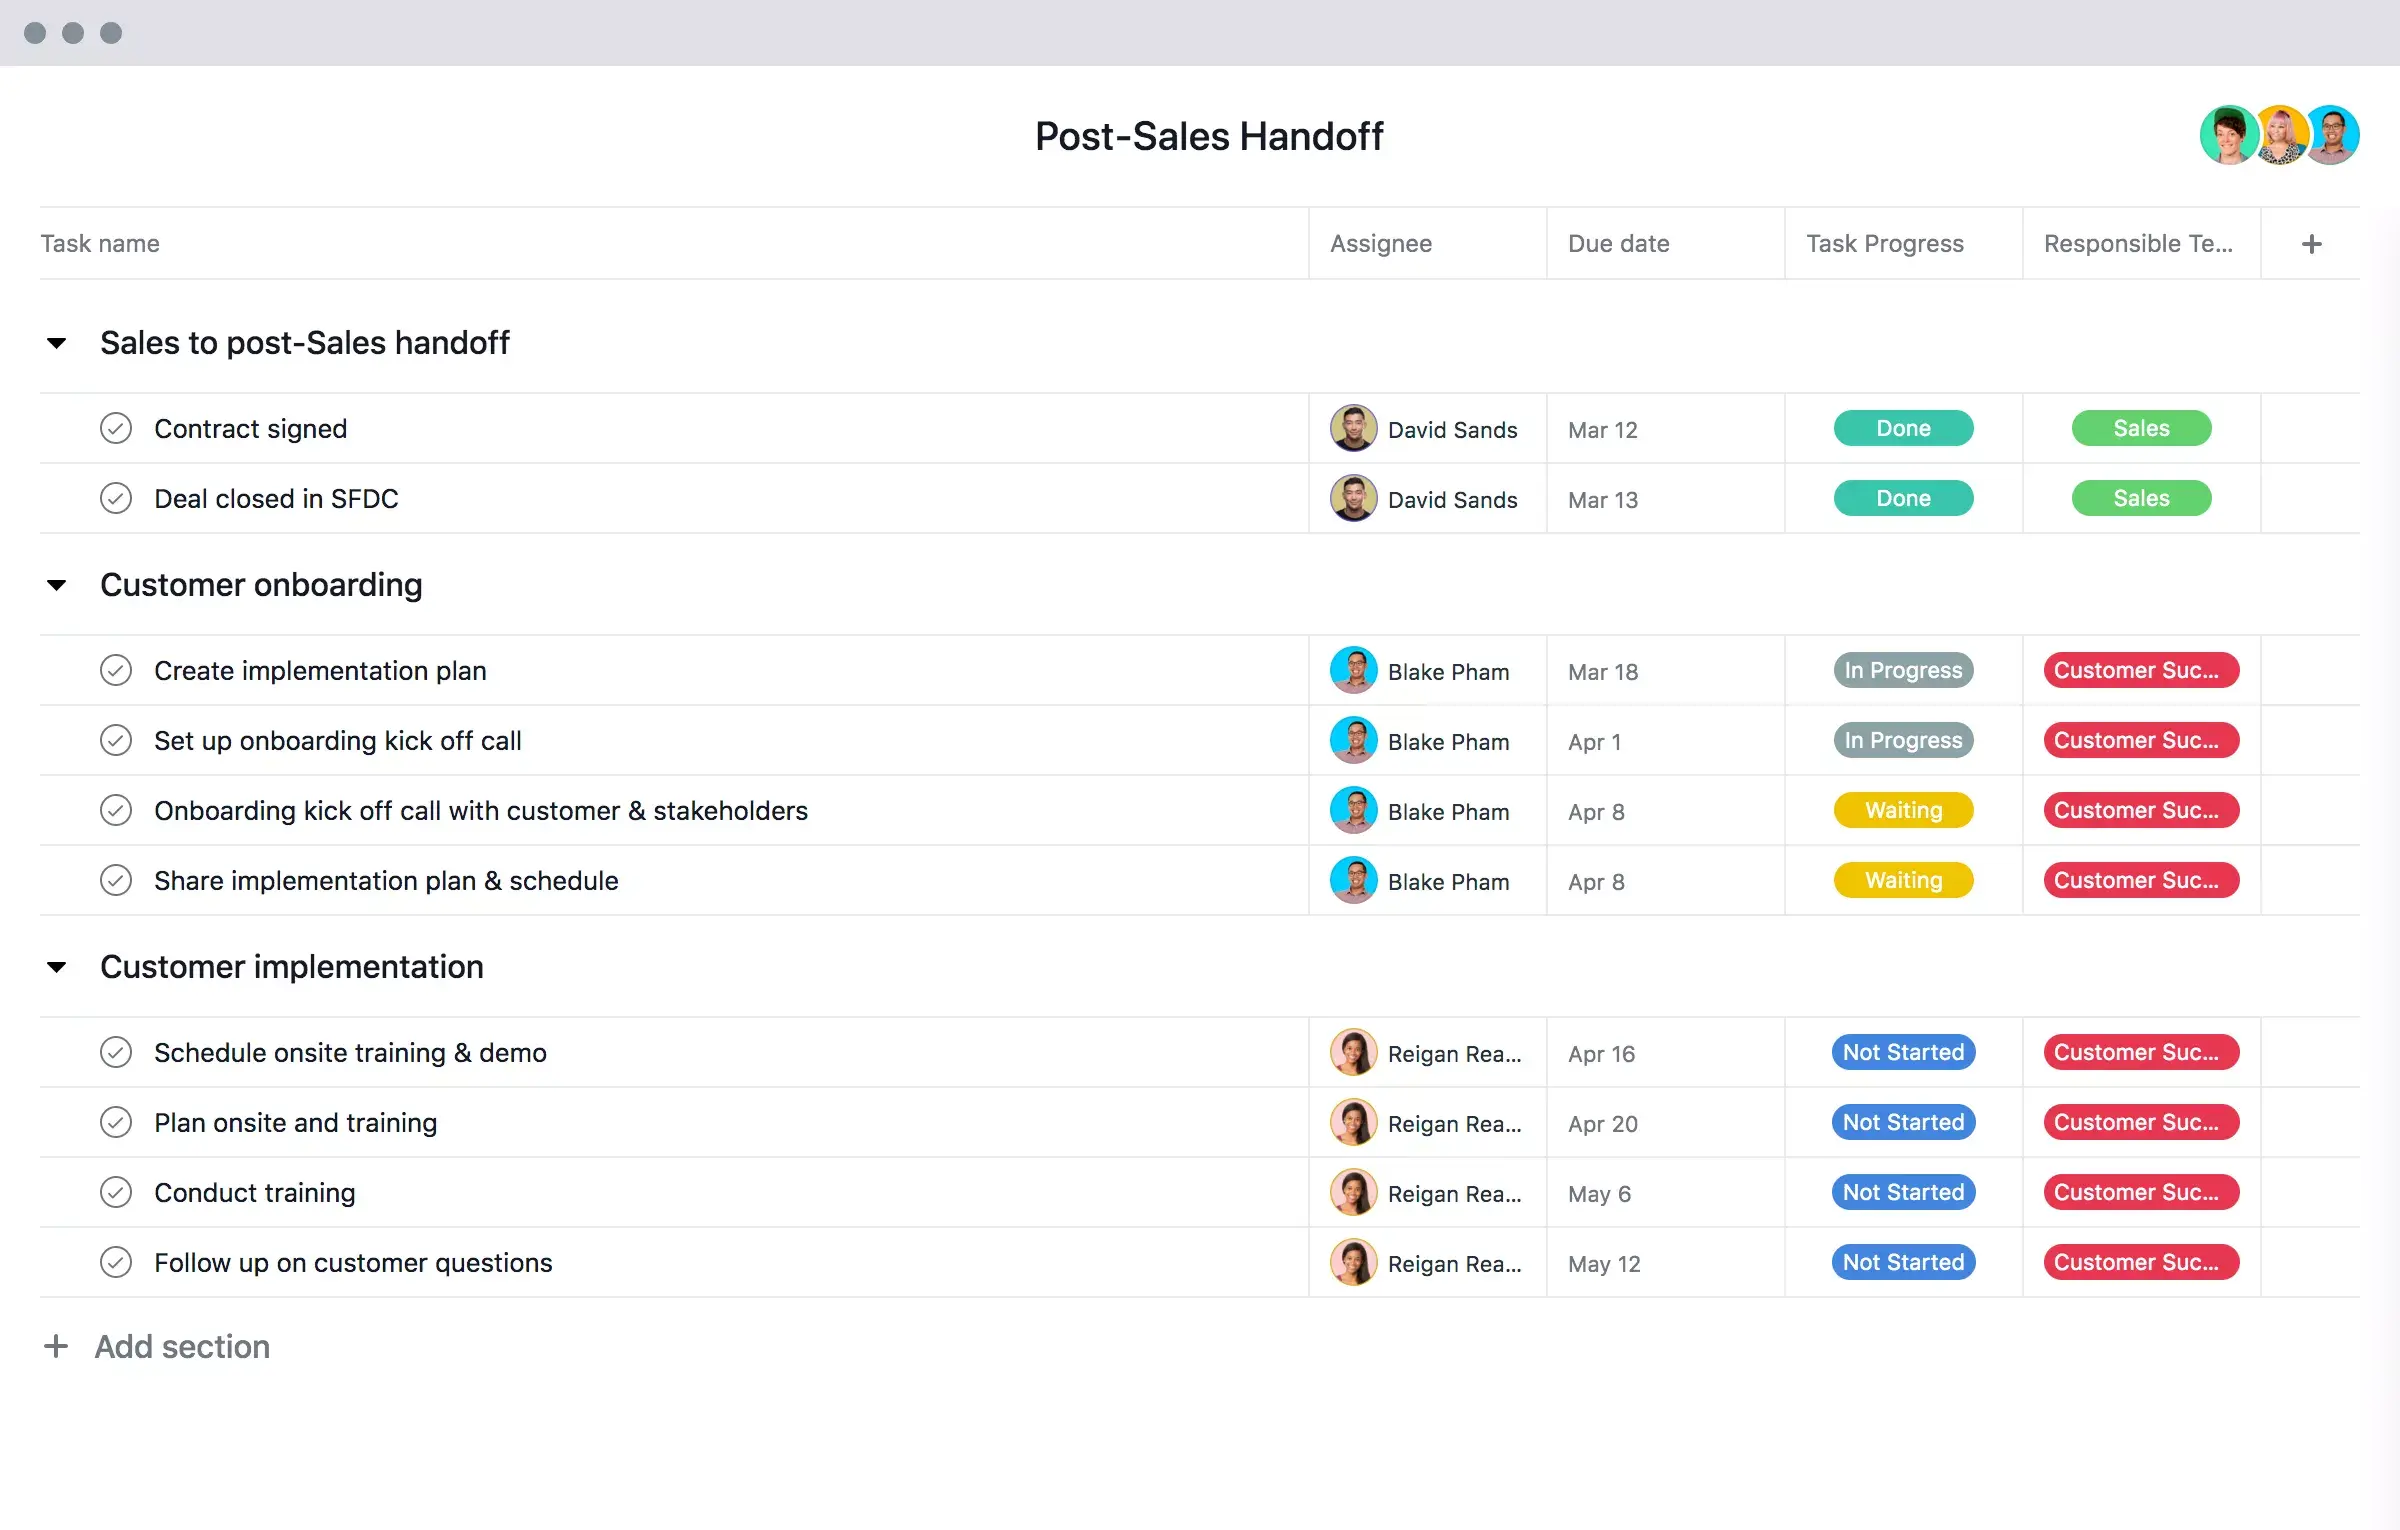 [Old product ui] Post-sales handoff template in Asana, spreadsheet-style project view (List)